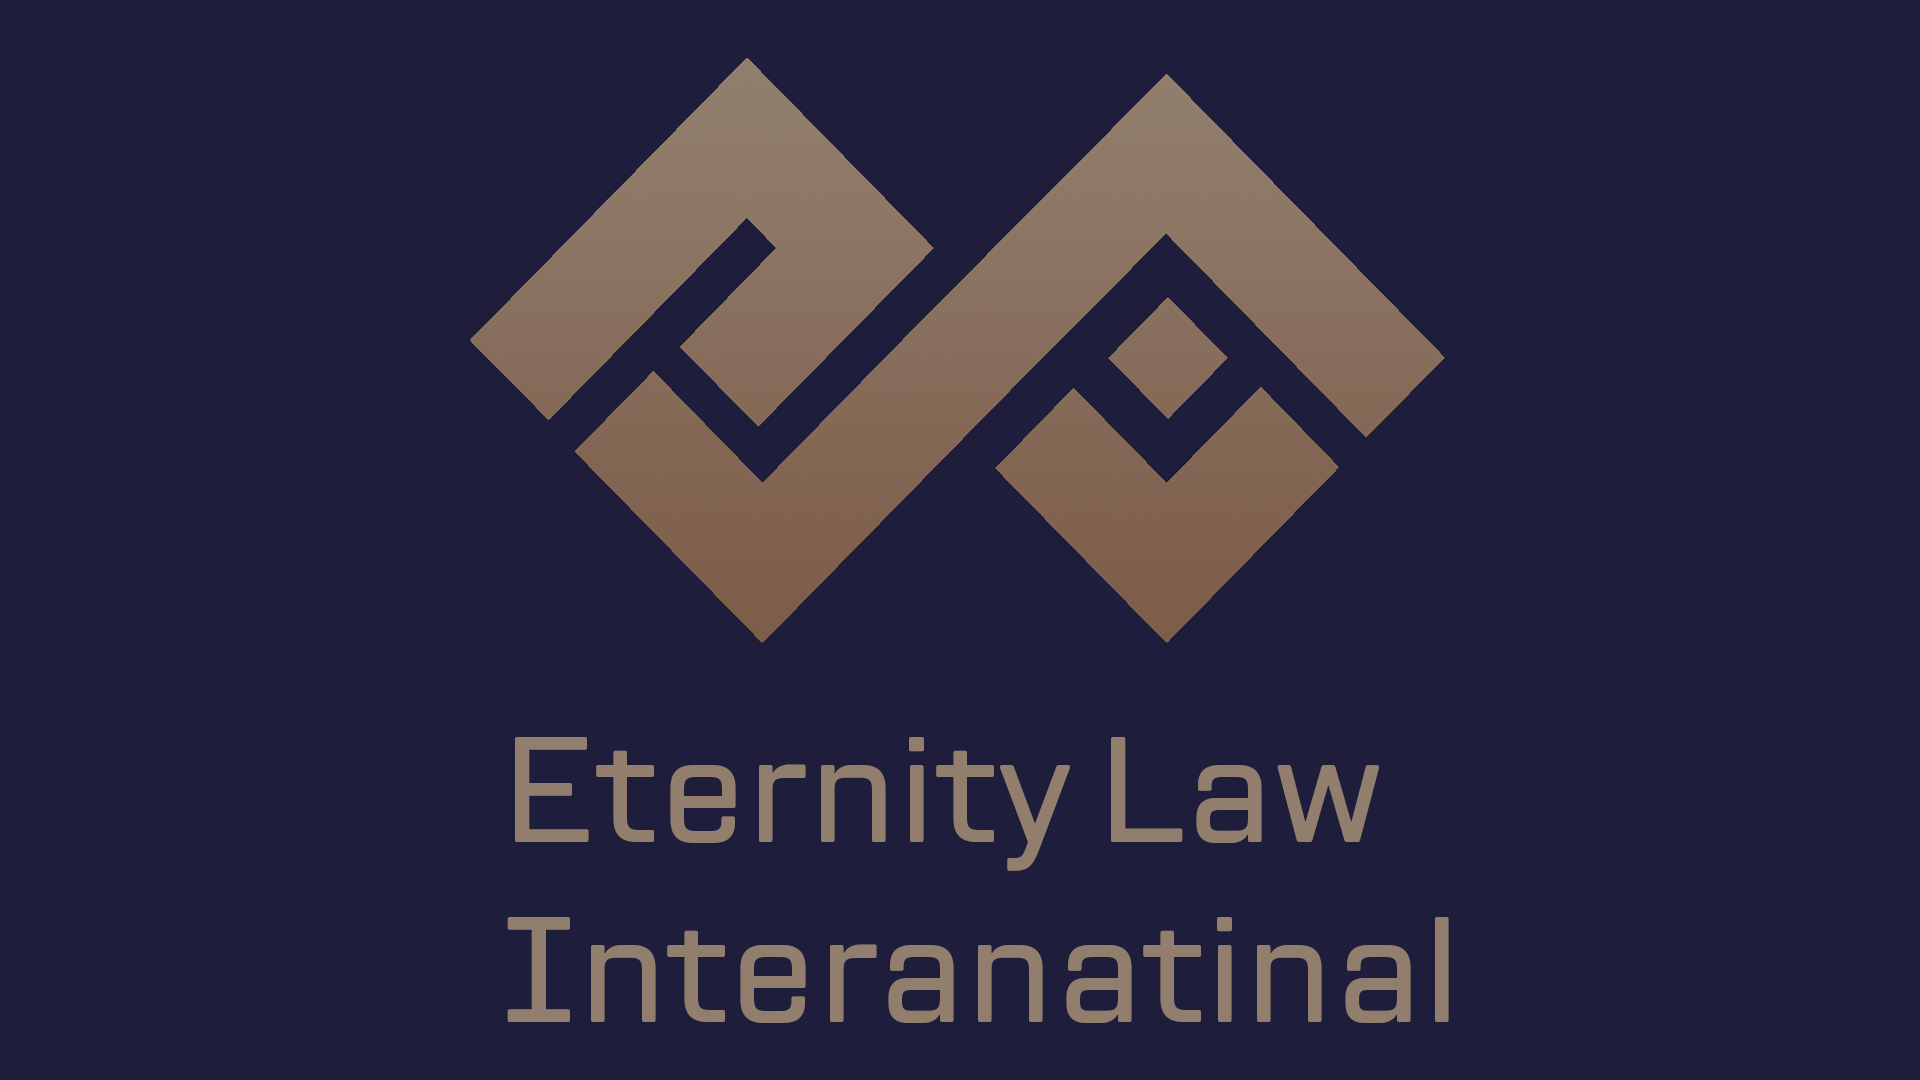 Eternity Law International: Empowering Firms to Emerge Triumphant